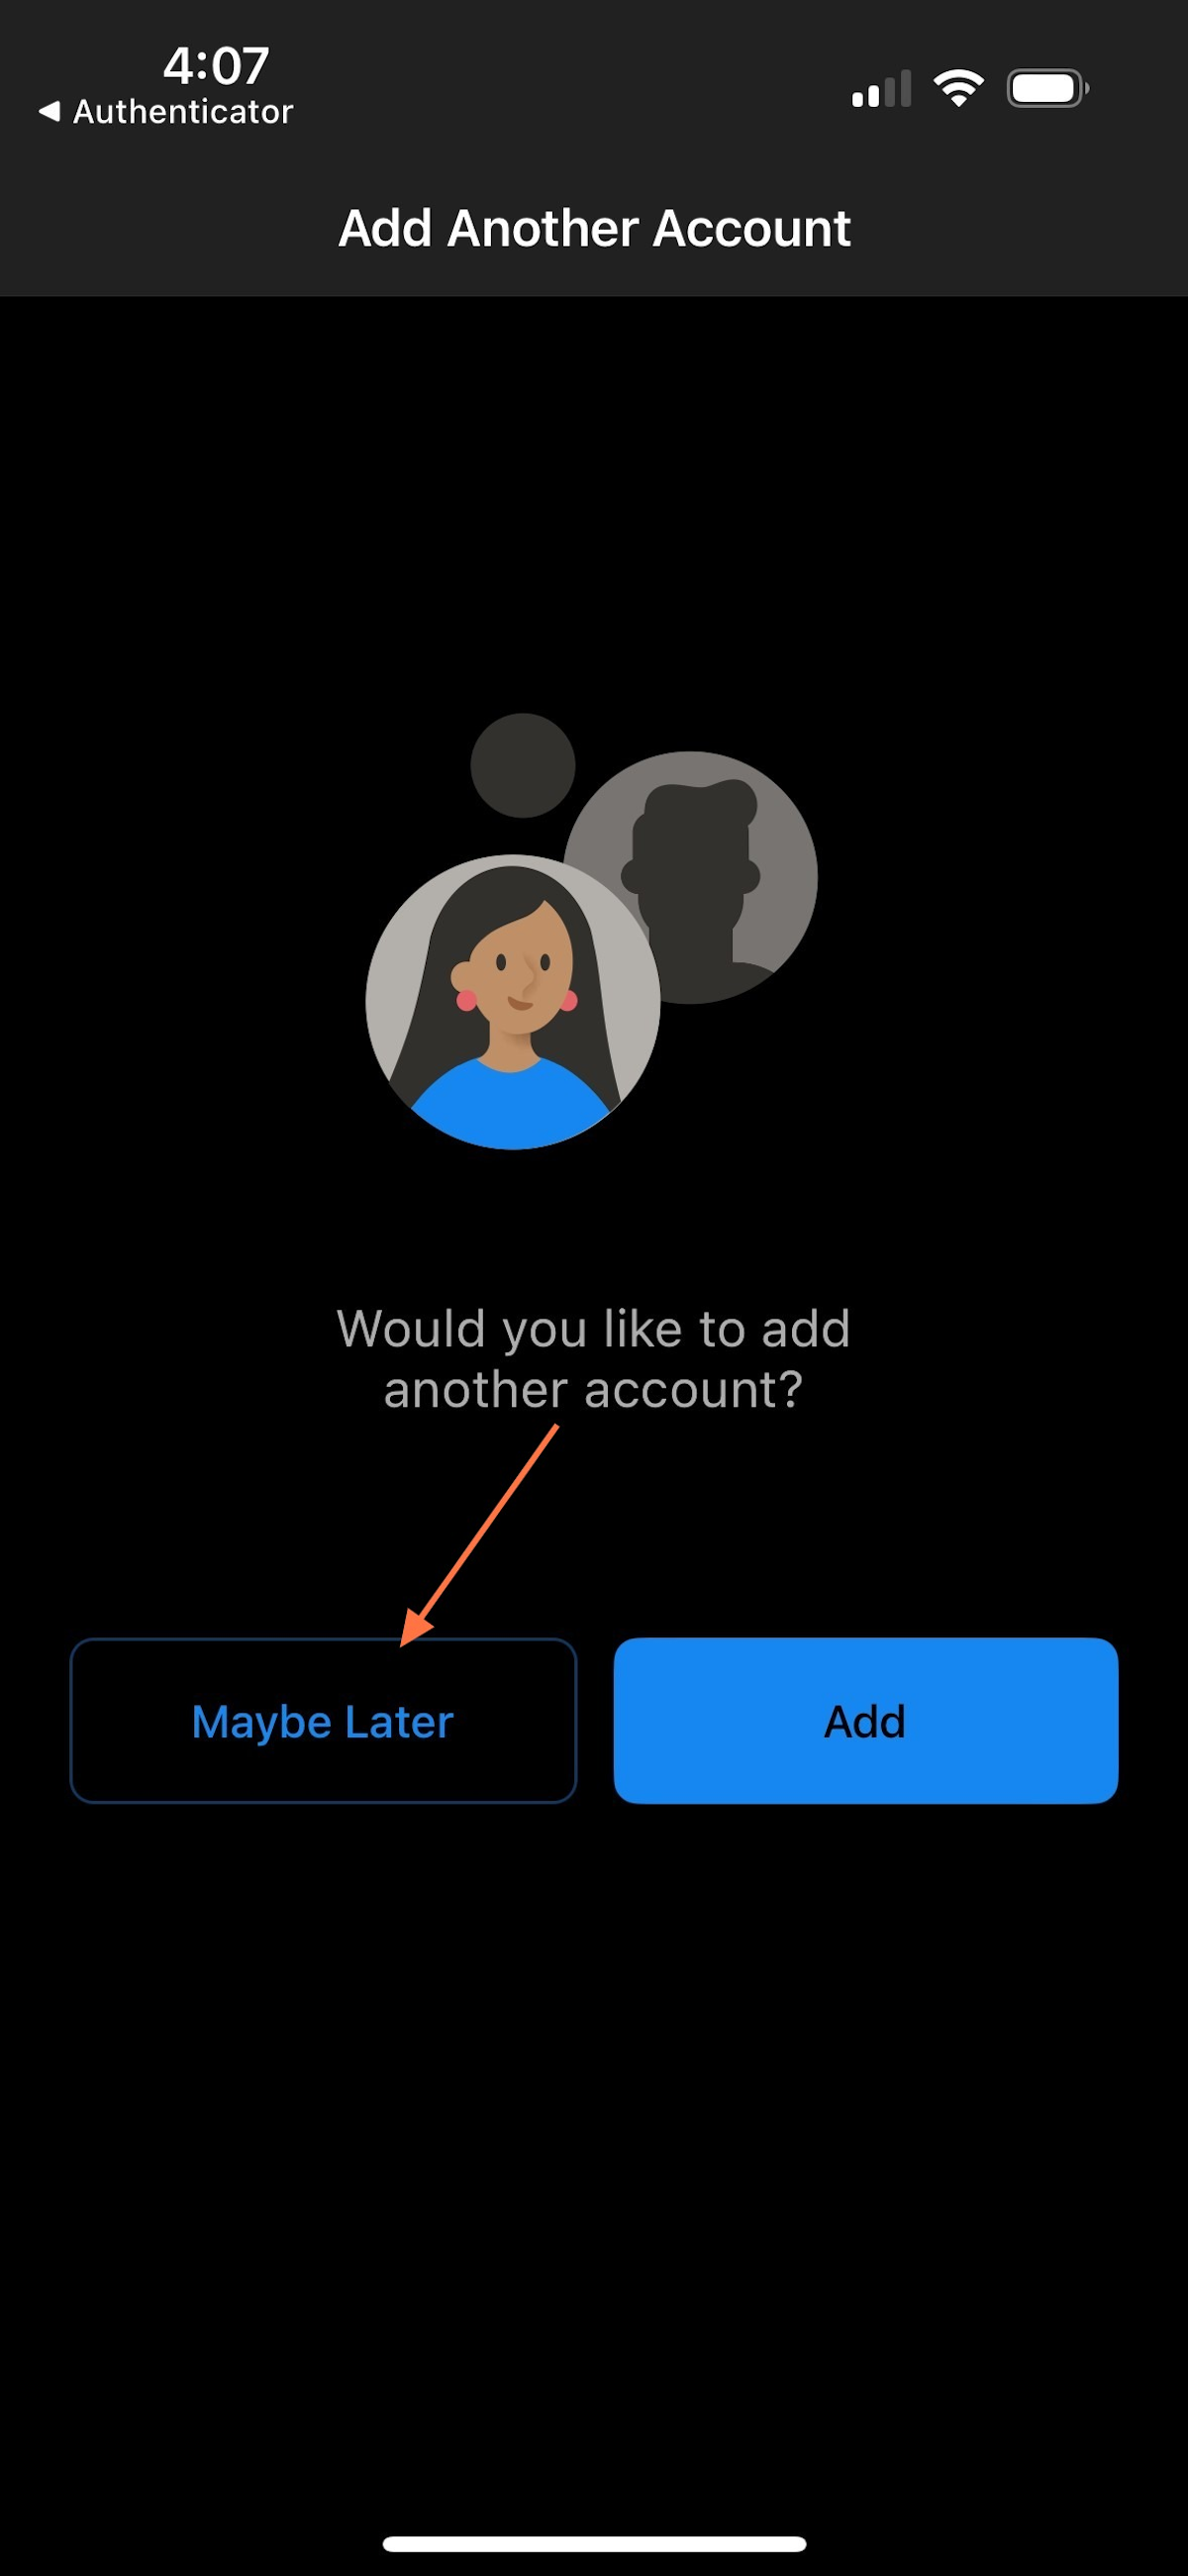 Once you authenticate your account, you are asked if you want to add another account.  If this is the only email account you want to add, click Maybe Later.